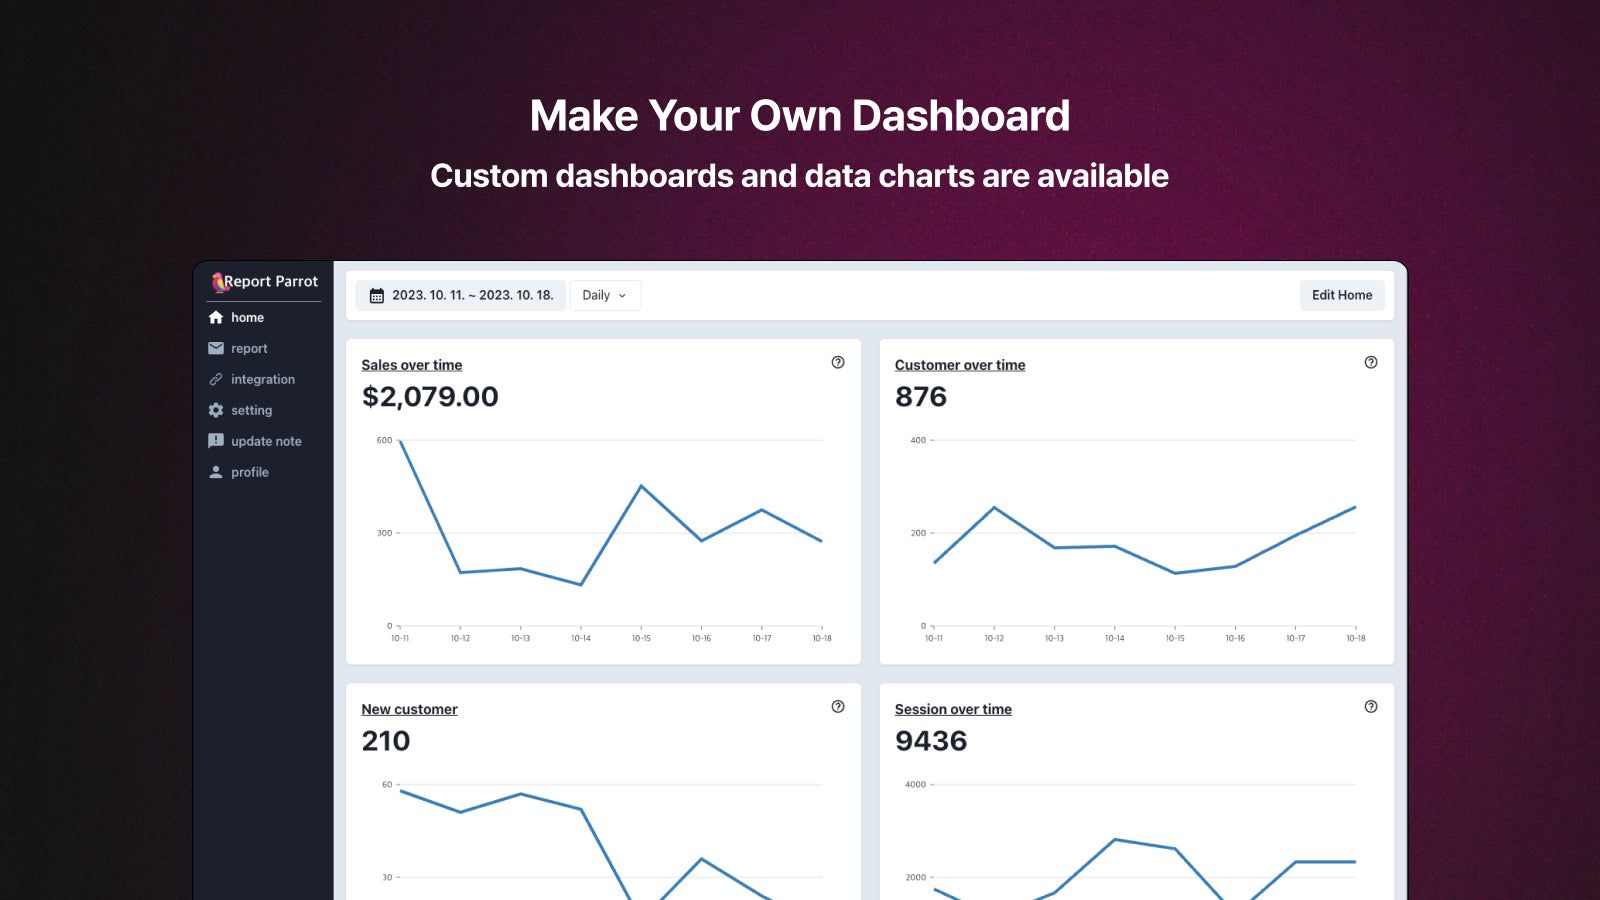 Set your own customised dashboard